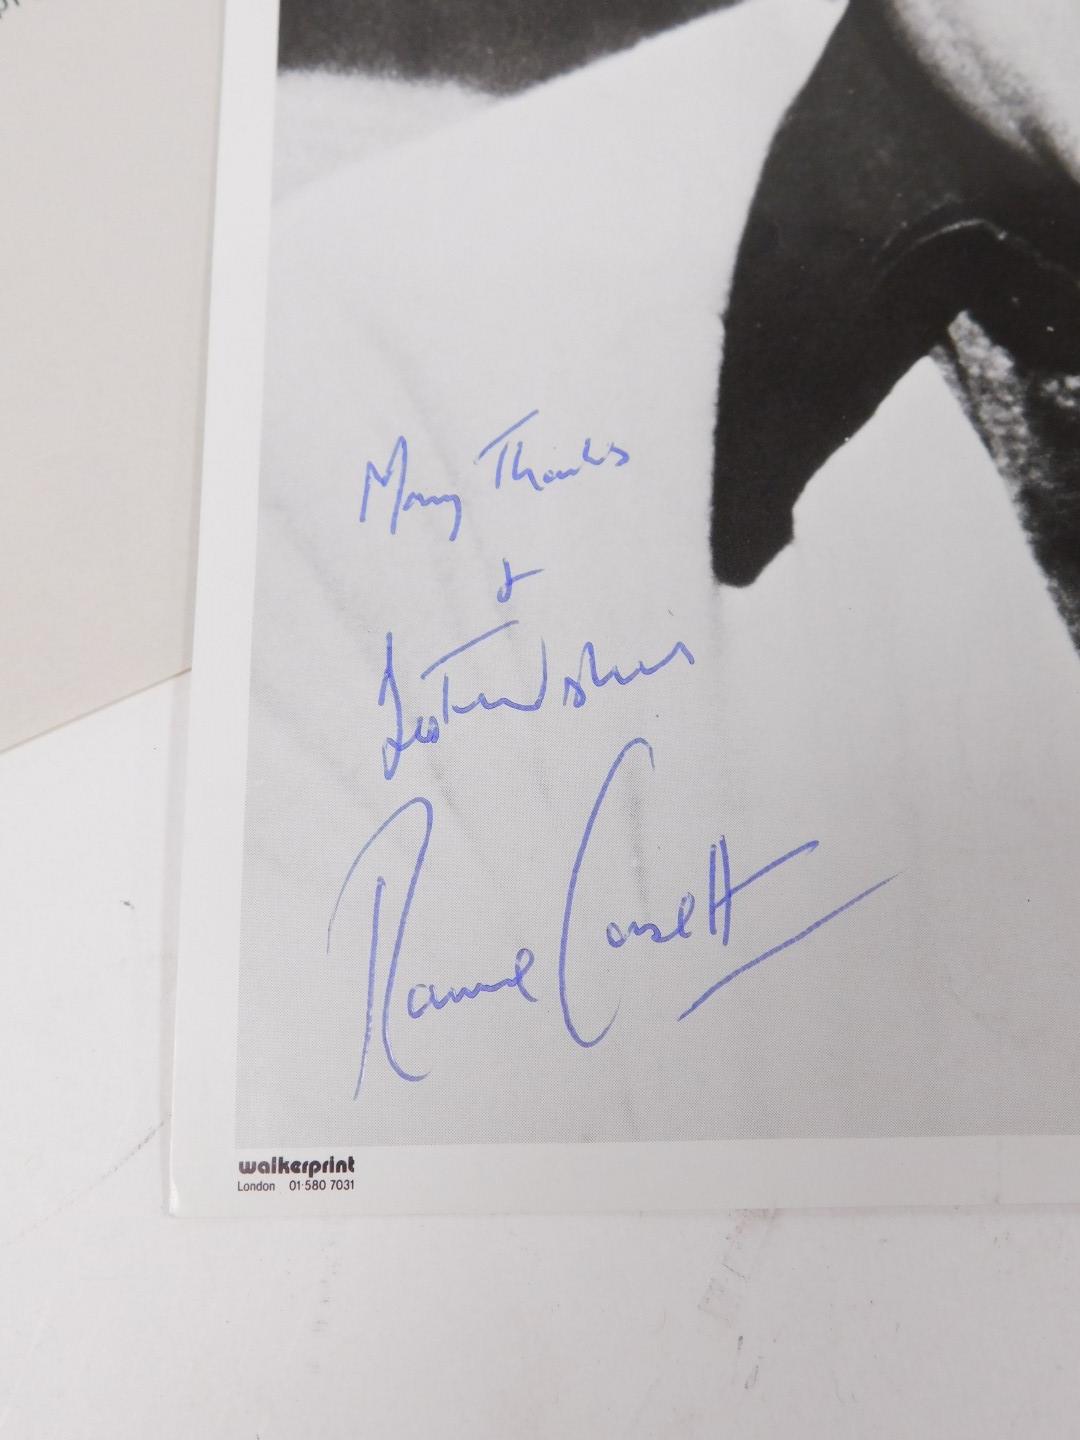 Grantham Interest. A signed letter from Ronnie Corbett, dated 17th February 1982, relating to his ti - Image 2 of 3